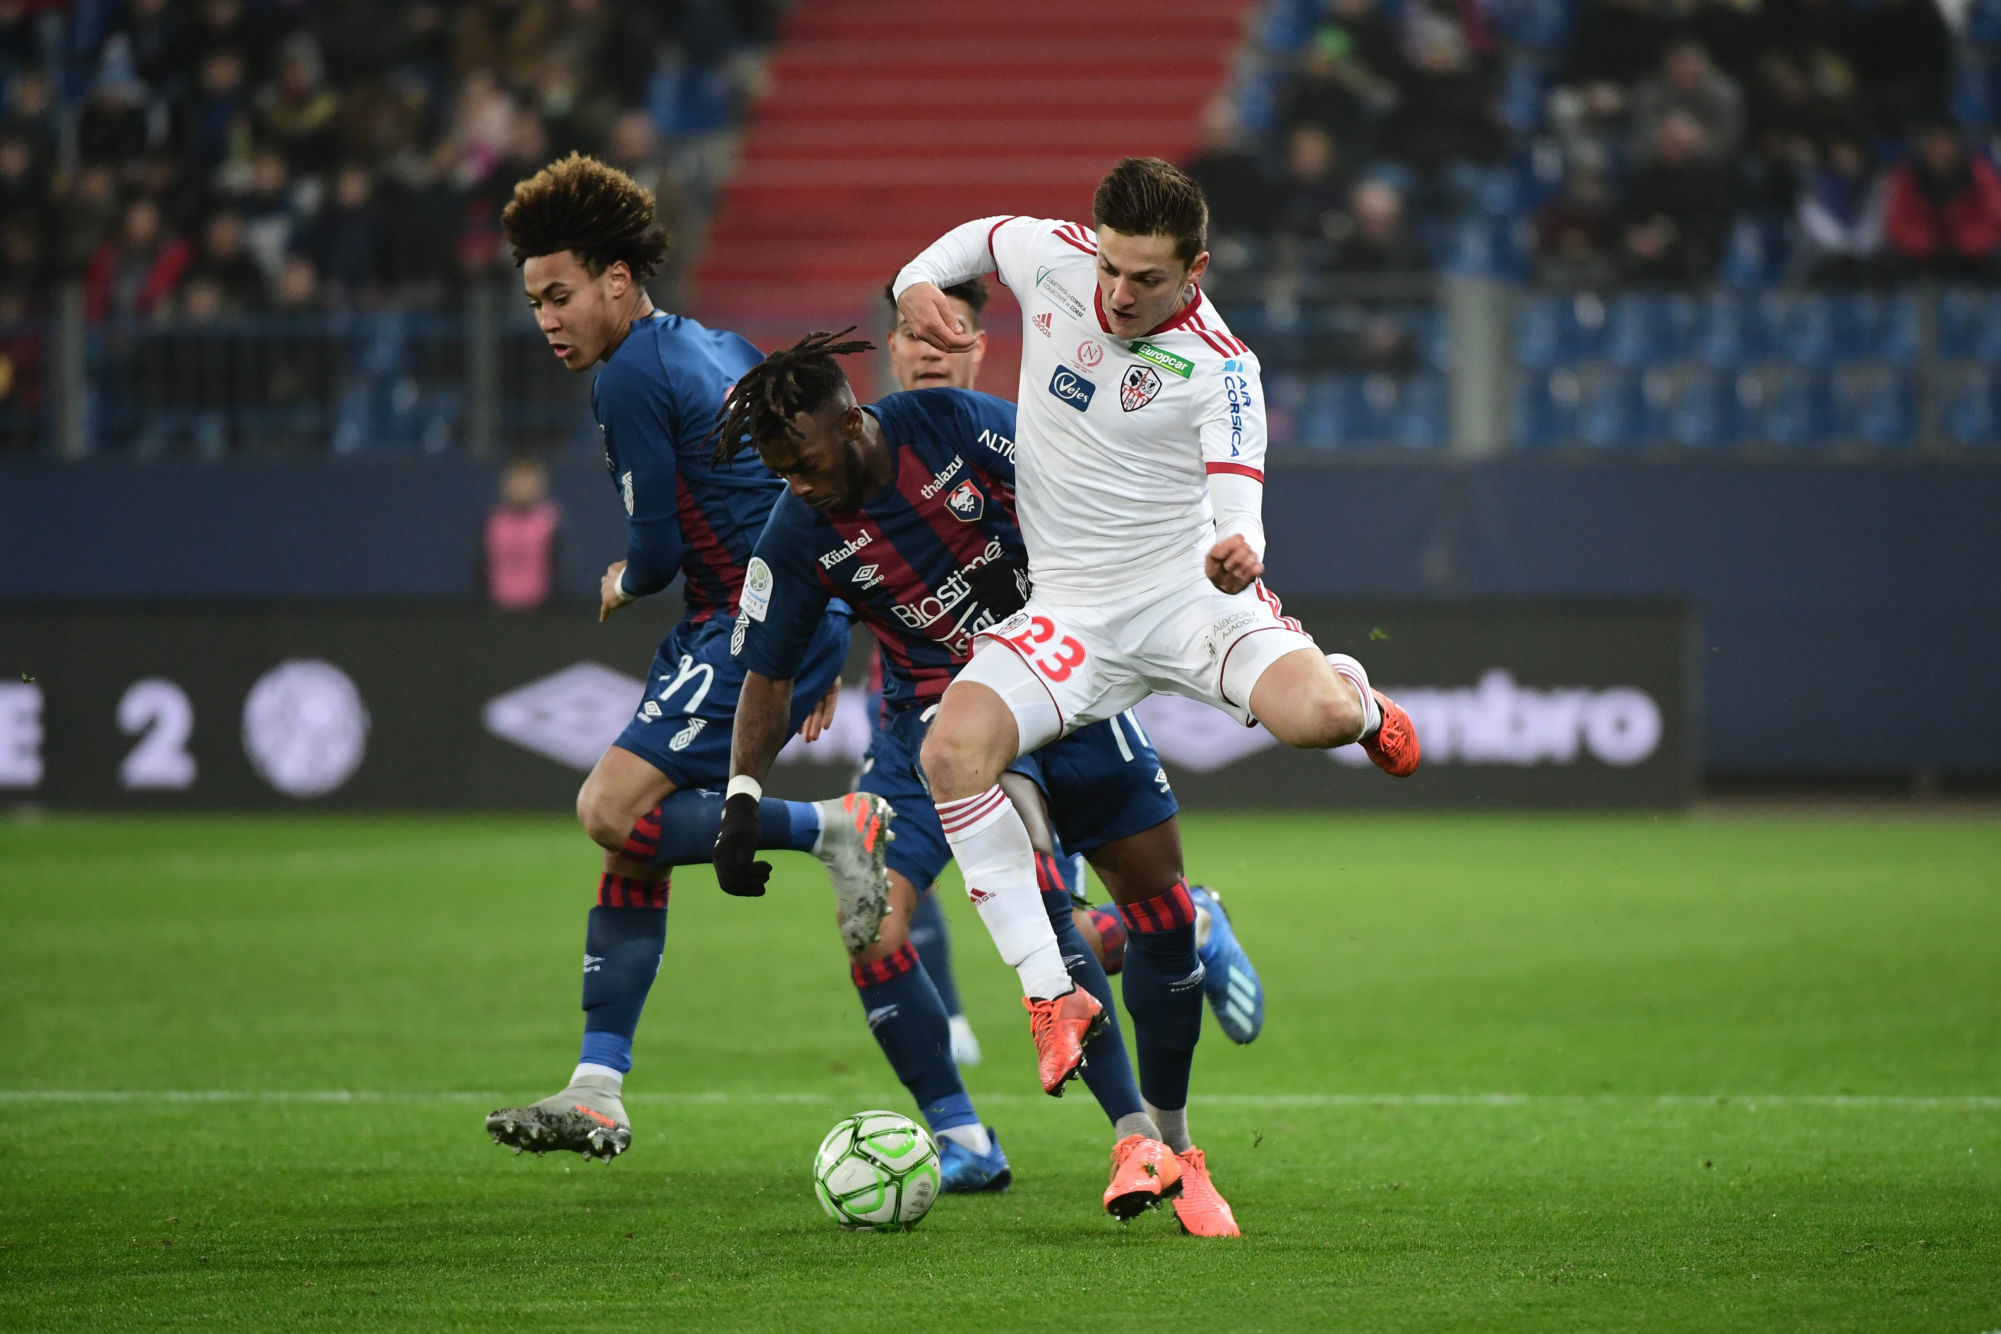 (R-L) Matthieu HUARD of AC Ajaccio, Steeve YAGO of Caen and Alexis BEKA BEKA of Caen during the Ligue 2 match between Caen and AC Ajaccio on January 24, 2020 in Caen, France. (Photo by Dave Winter/Icon Sport) - Stade Michel d'Ornano - Caen (France)